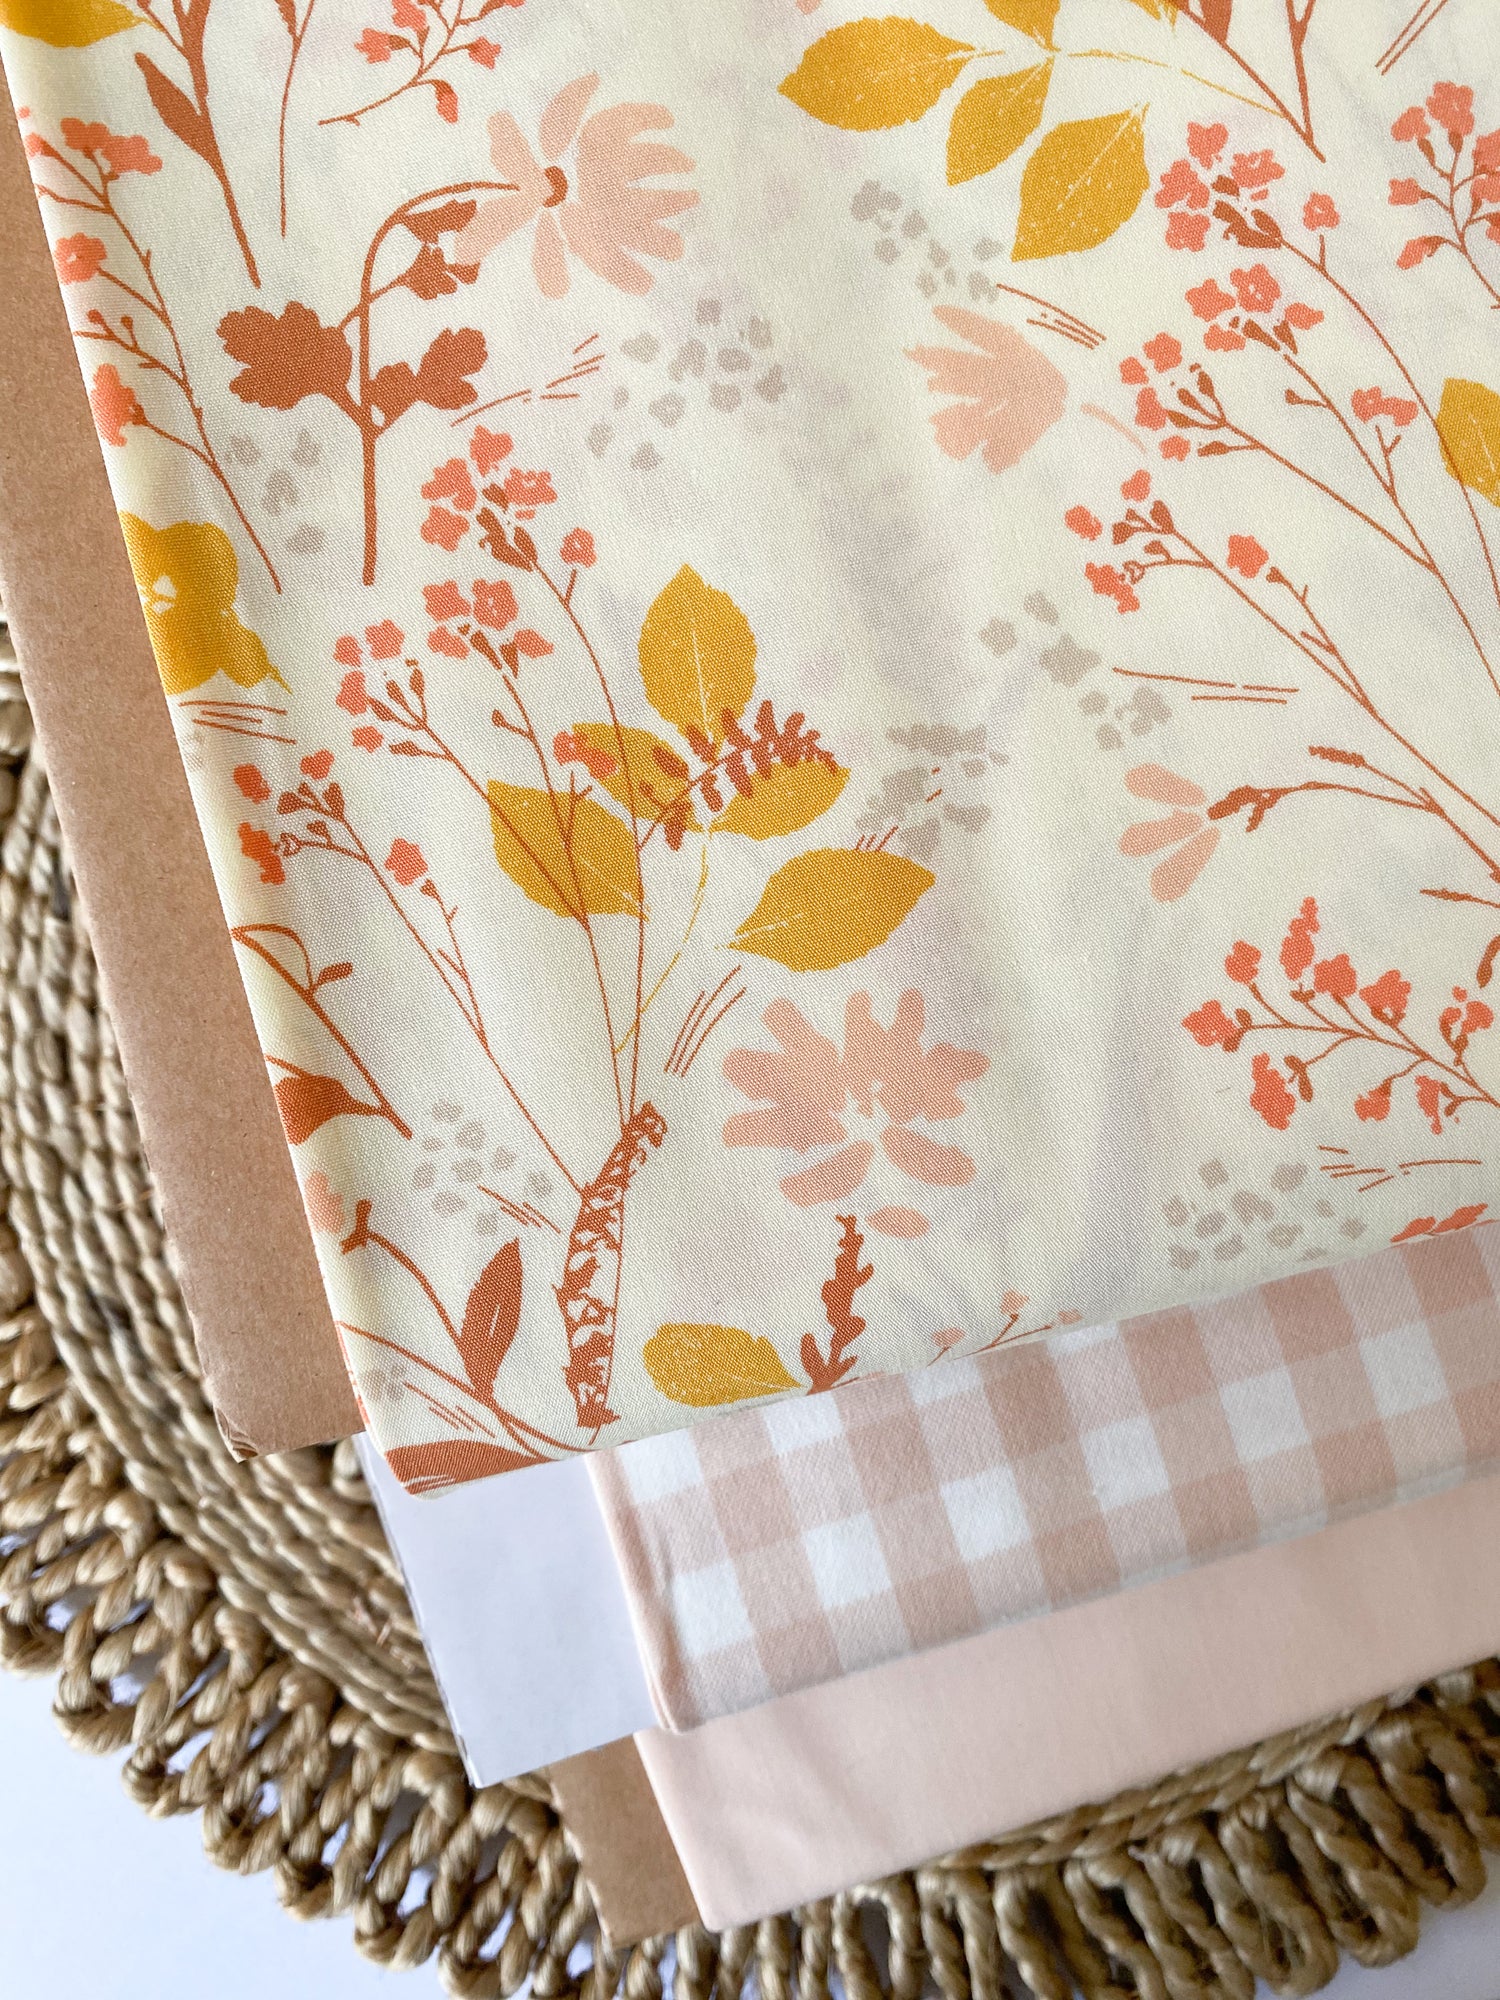 Nature Walk - Wholecloth Baby Quilt Kit